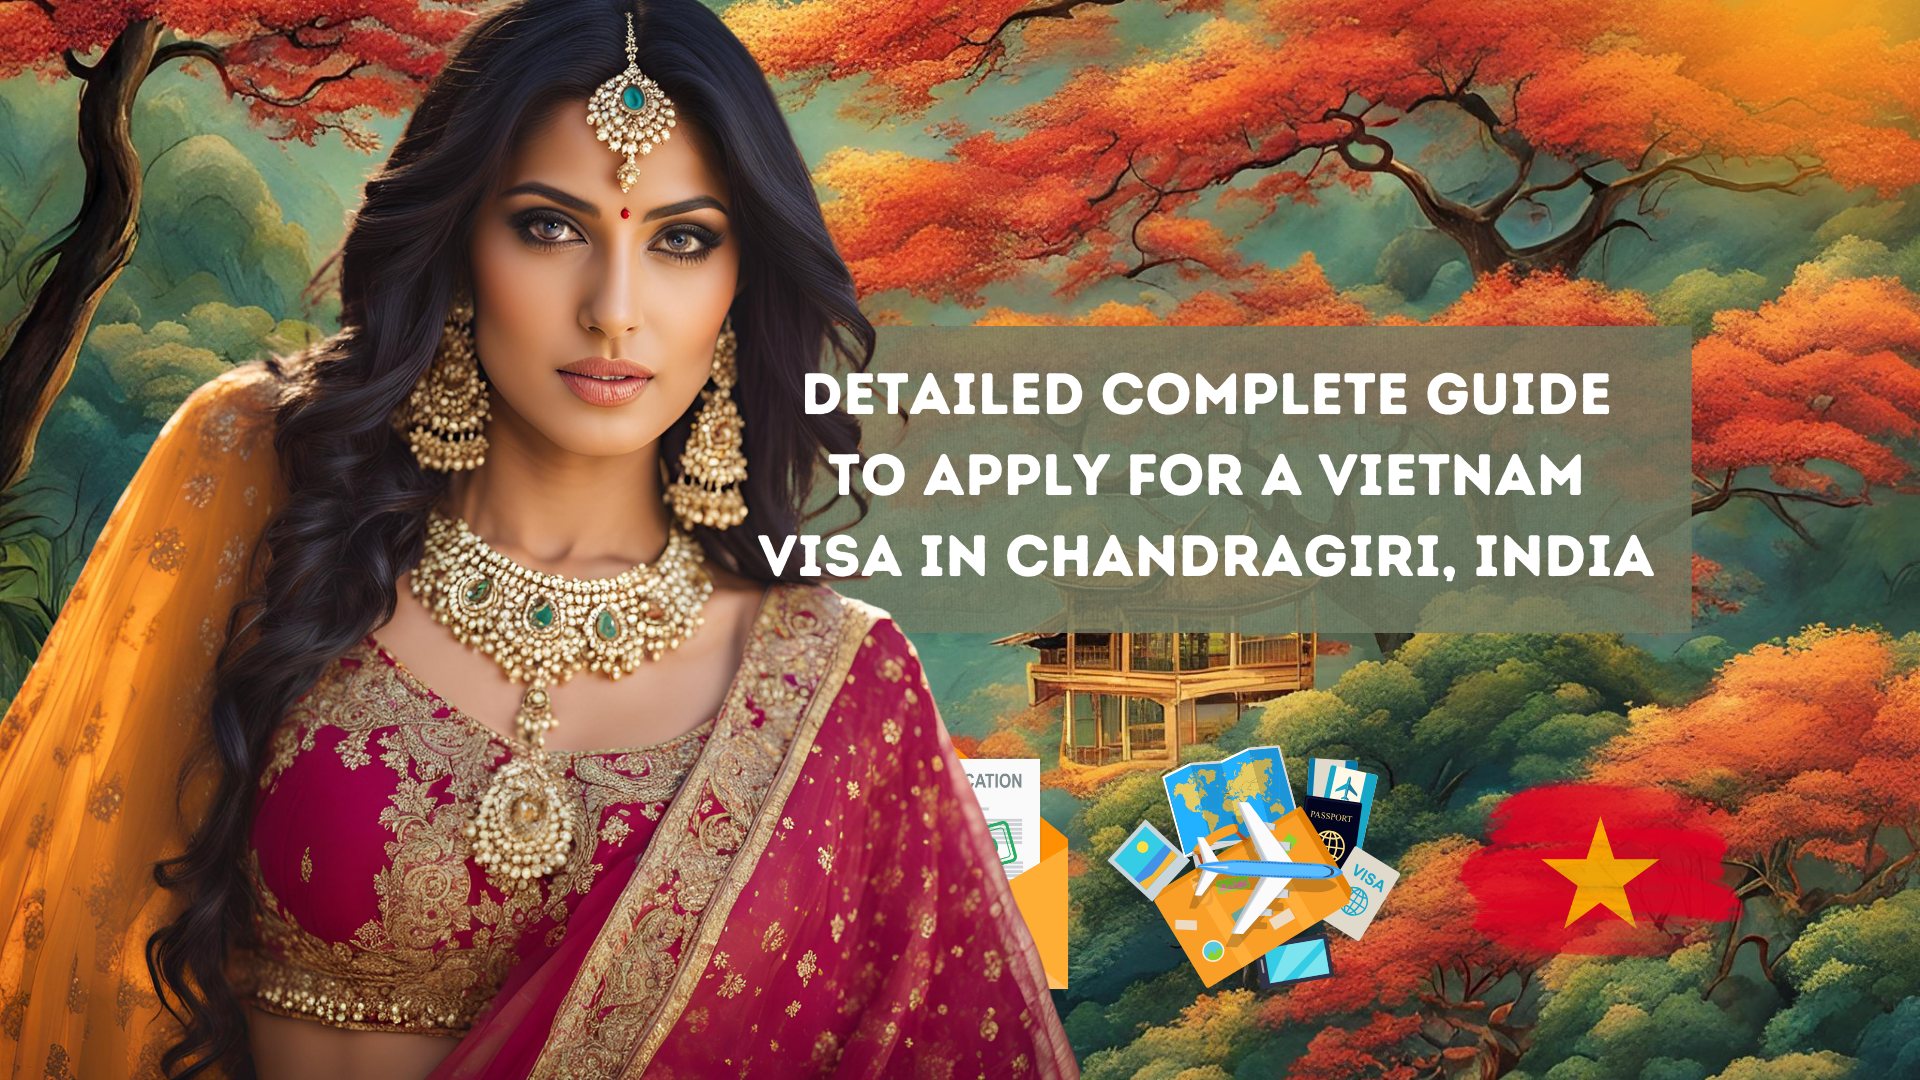 Detailed Complete Guide to Apply for a Vietnam Visa in Chandragiri, India